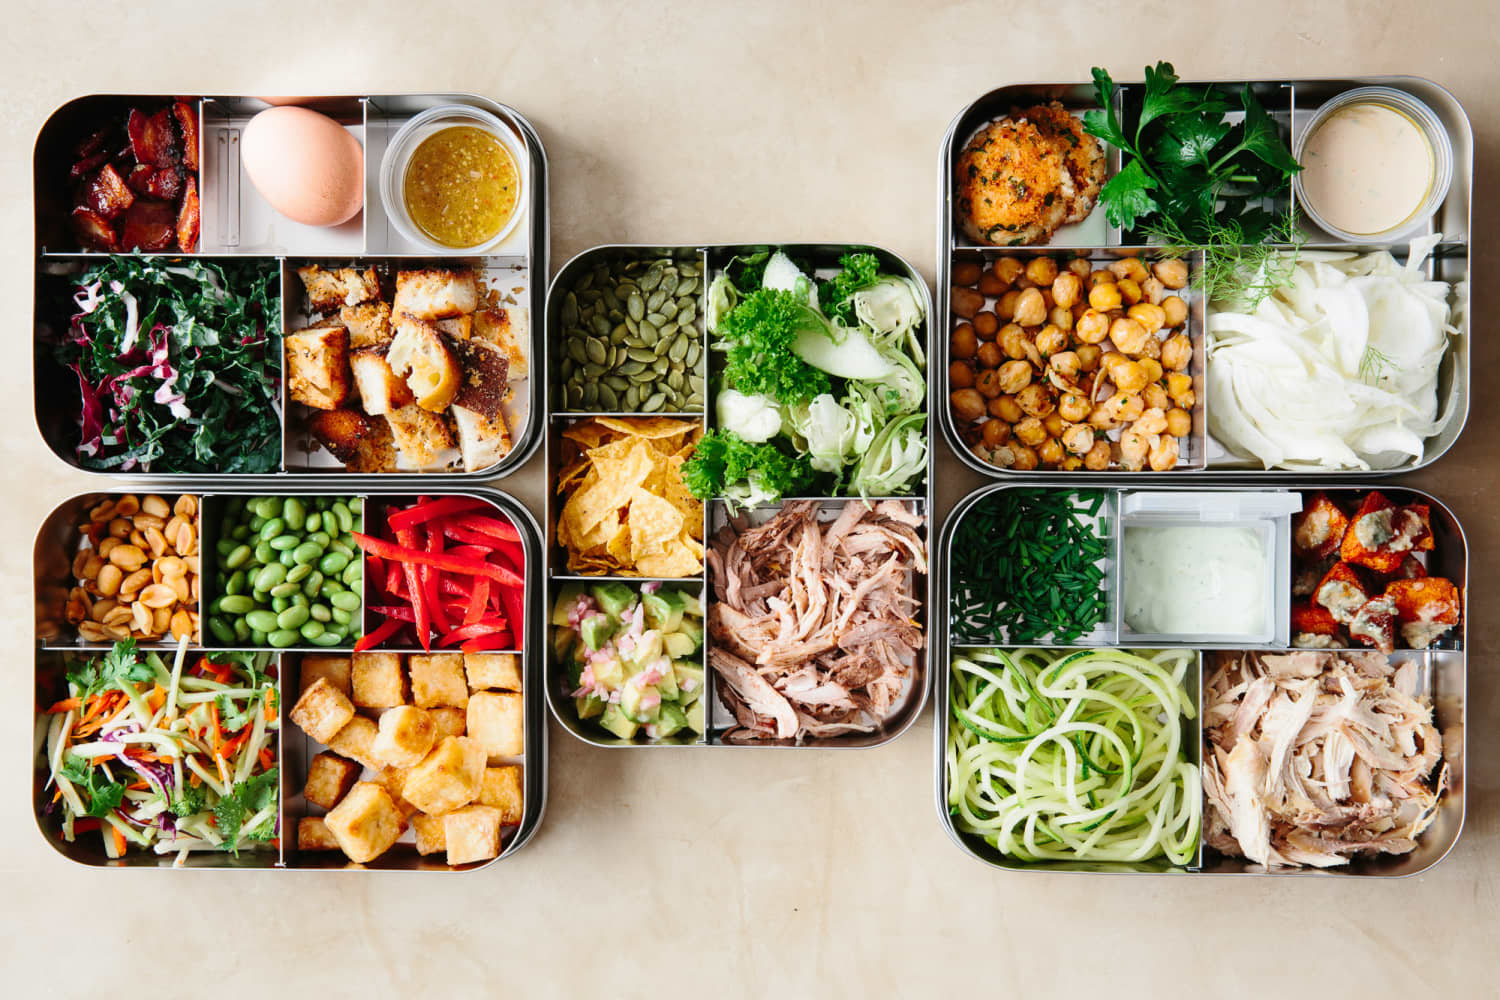 26 Wow-Worthy Packed Lunches To Brighten Up Your Day